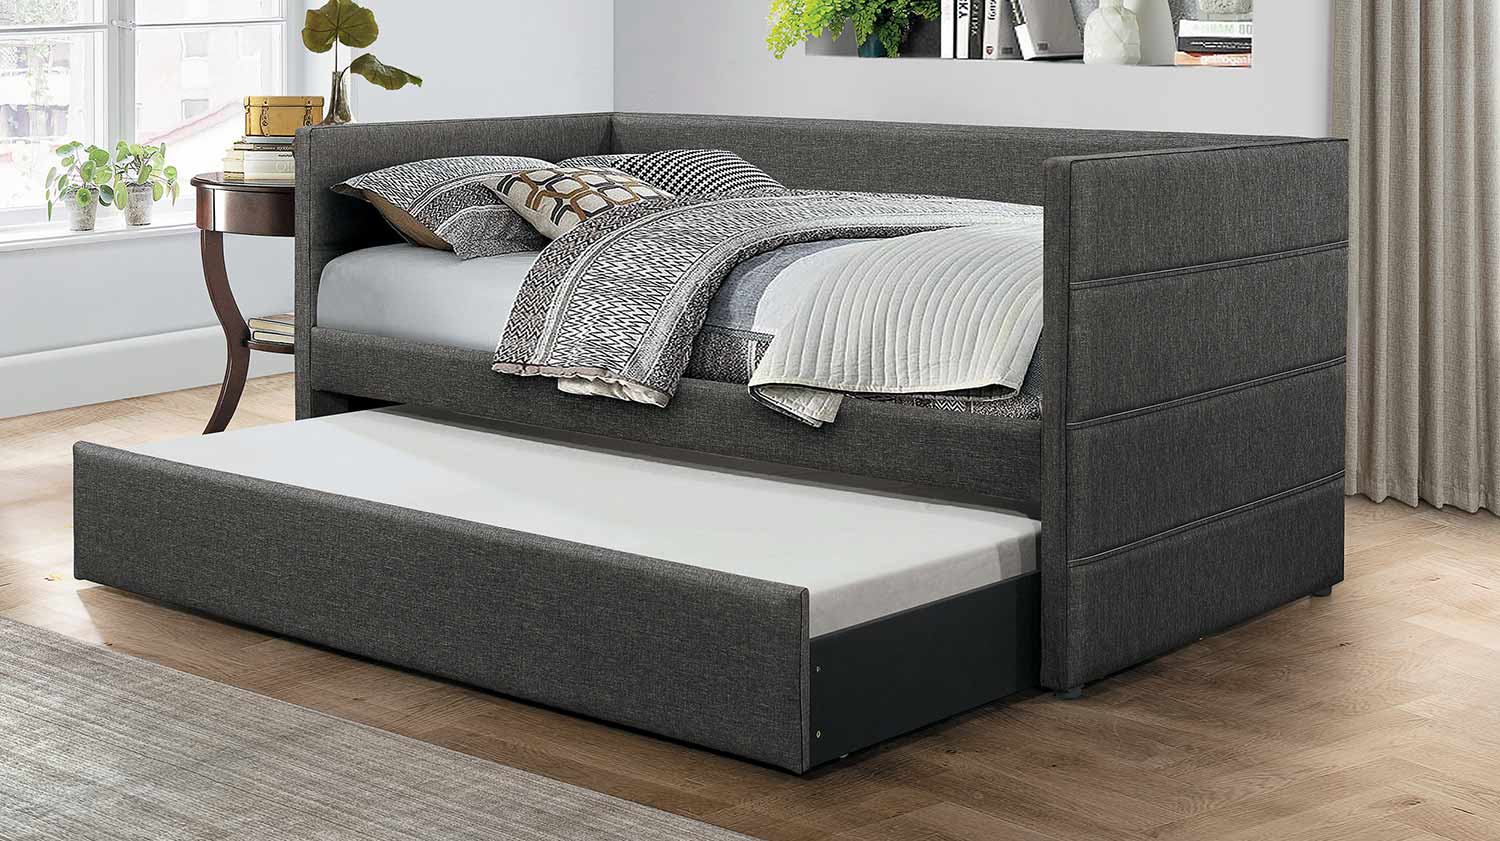 Homelegance Vining Daybed with Trundle - Dark Gray